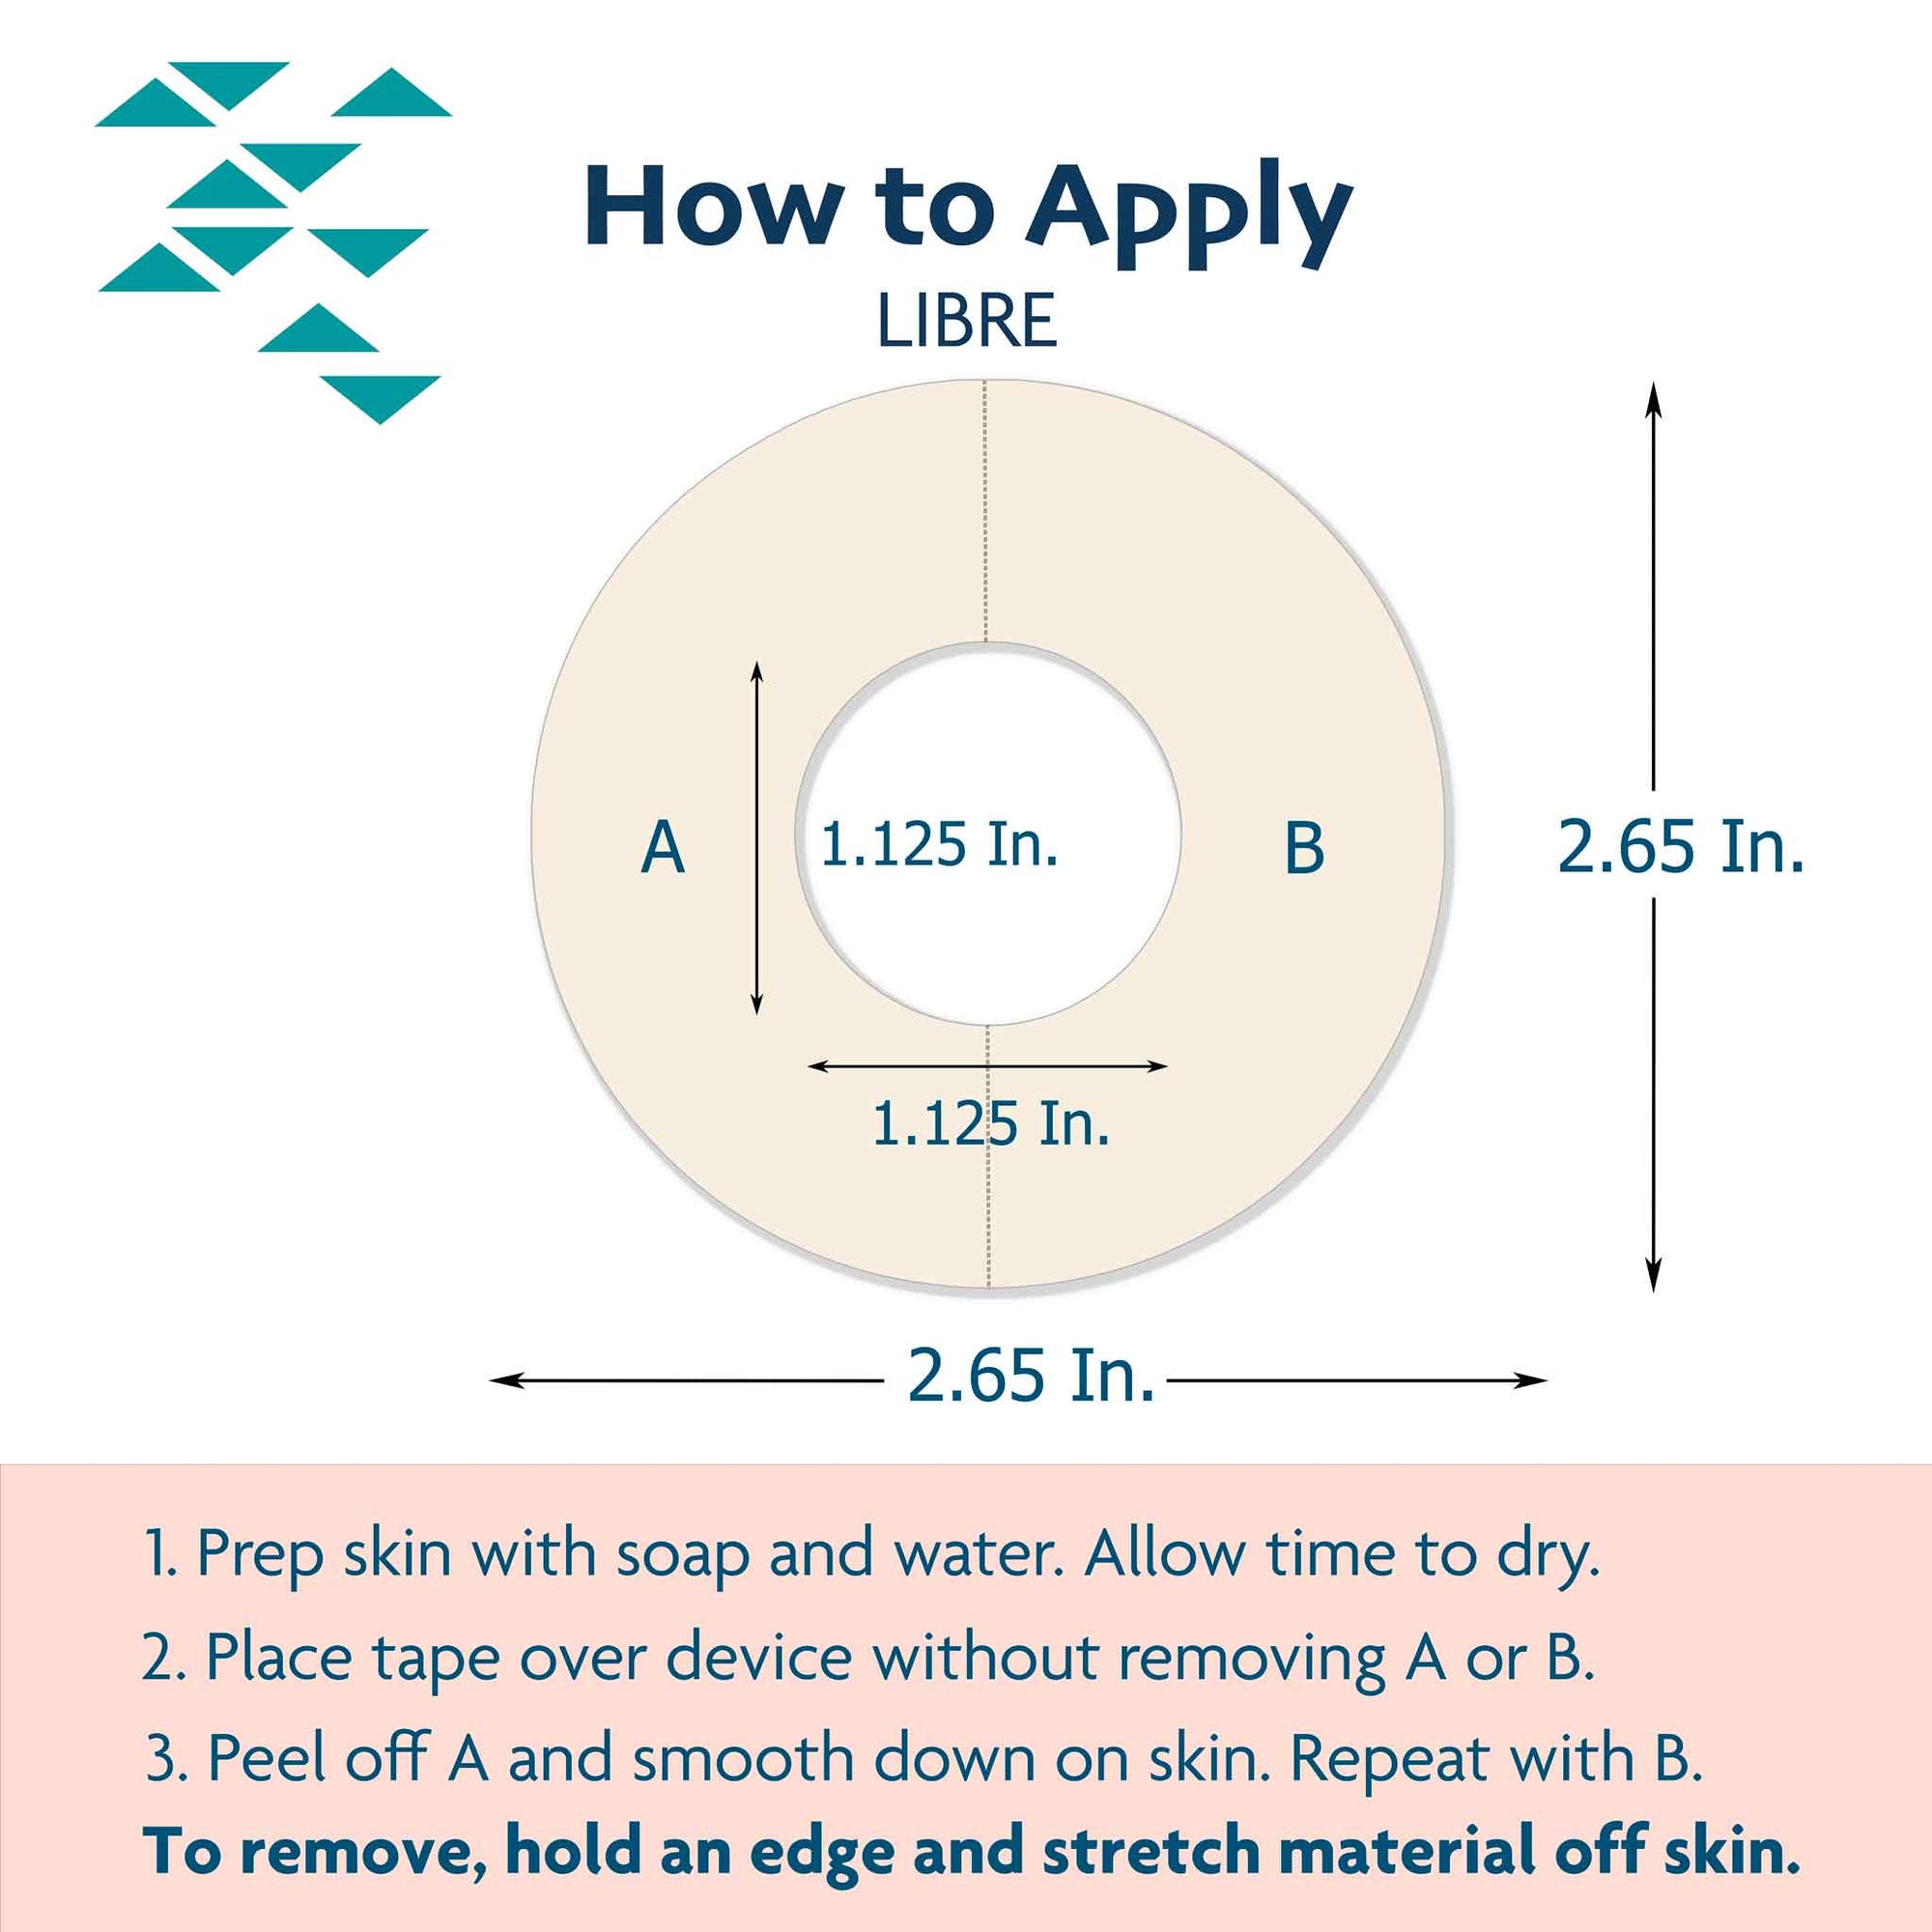 ExpressionMed Guide for covering CGM with libre patch